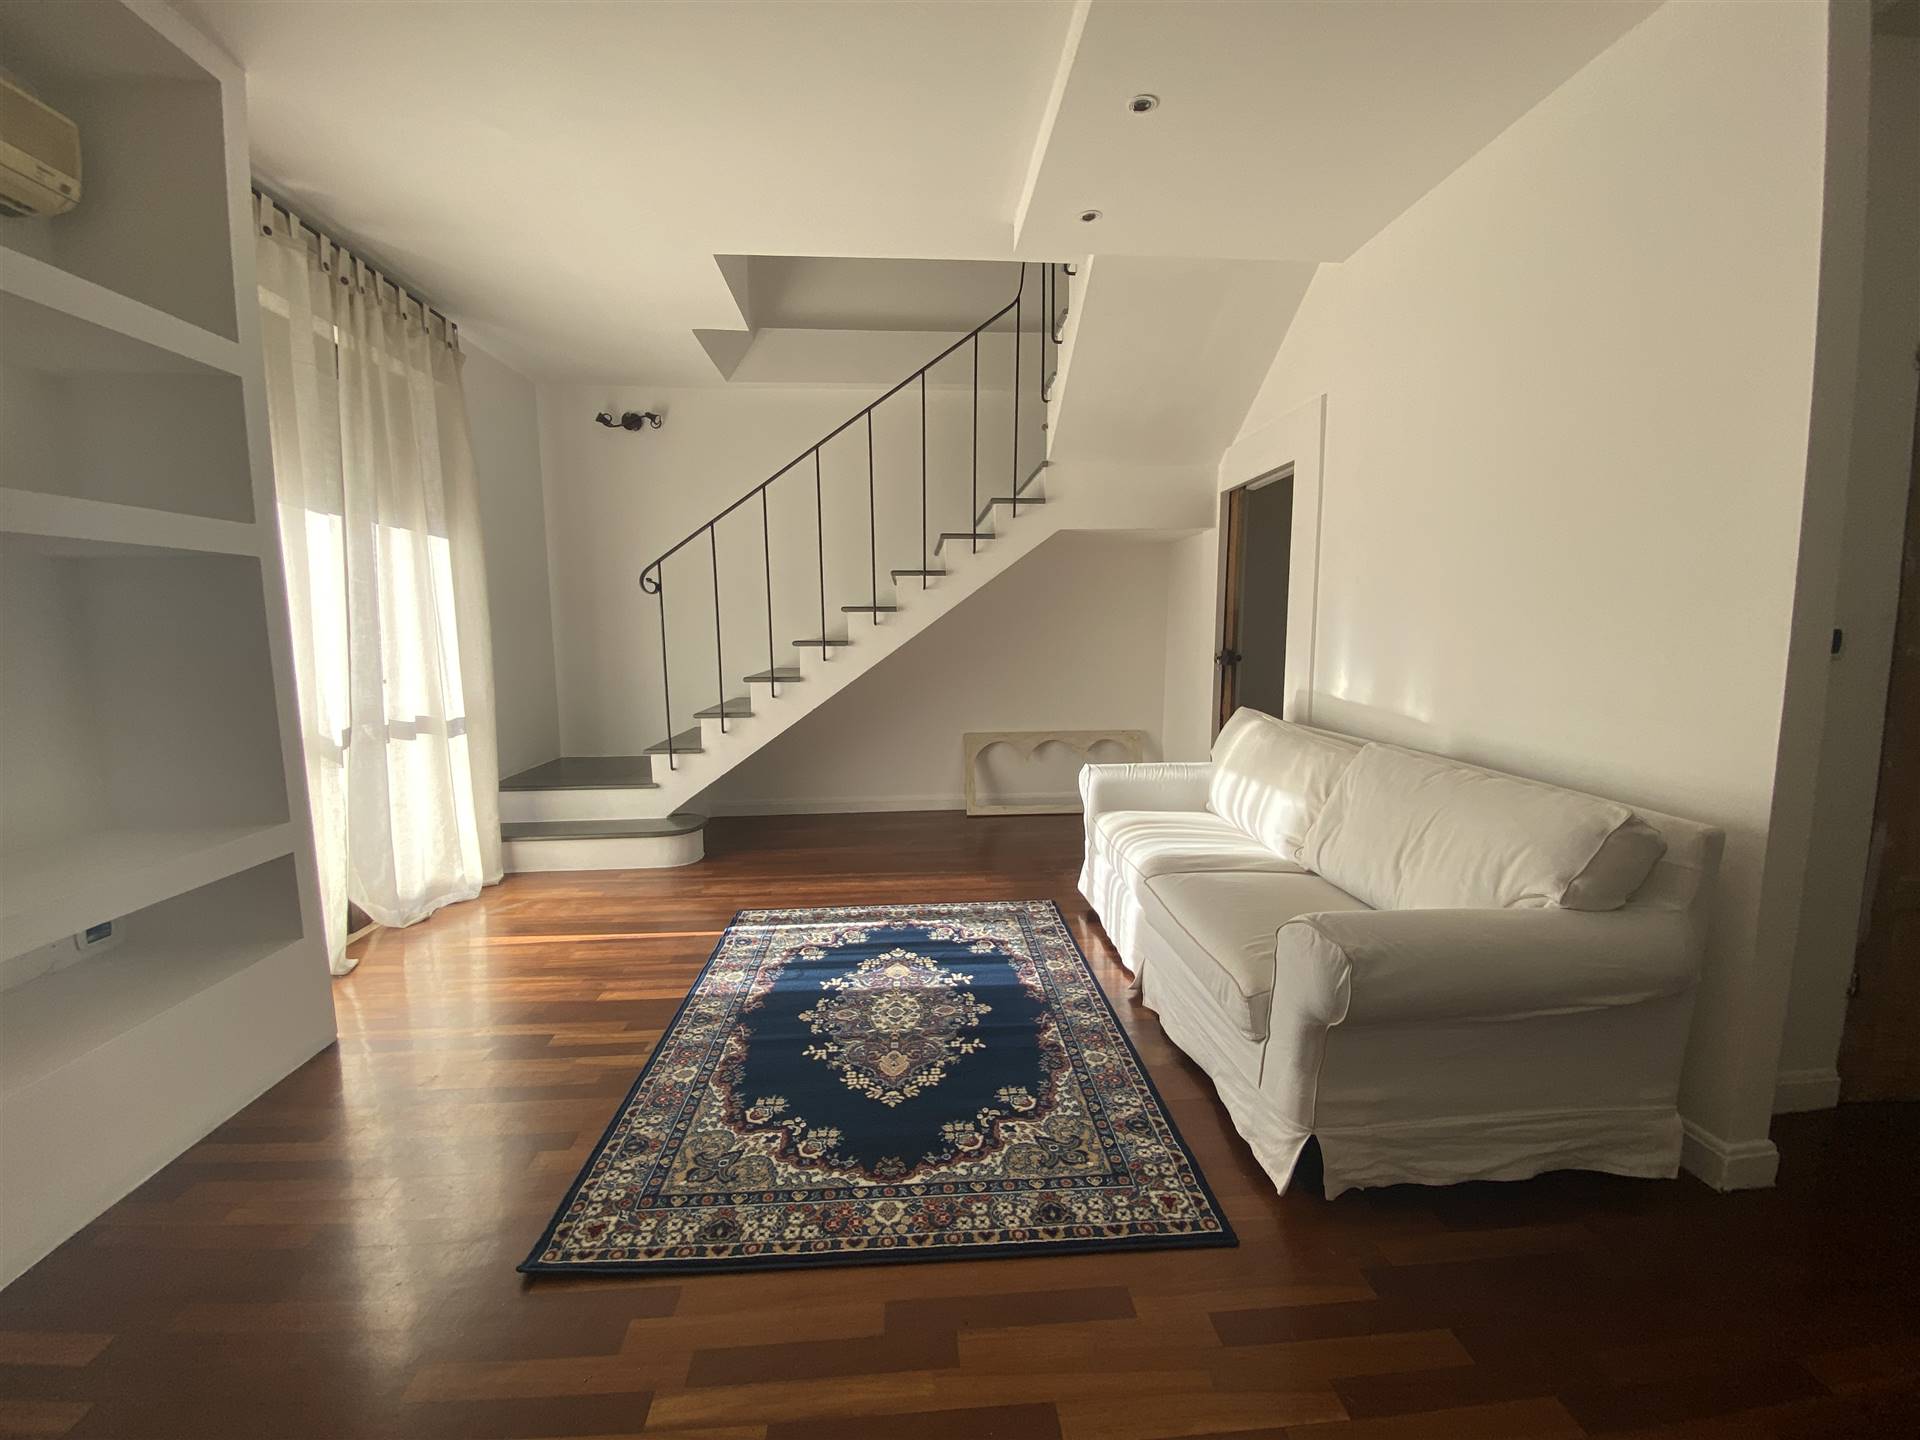 SCOPAIA, LIVORNO, Terraced house for sale, Excellent Condition, Heating Individual heating system, Energetic class: F, Epi: 103,7 kwh/m2 year, placed 